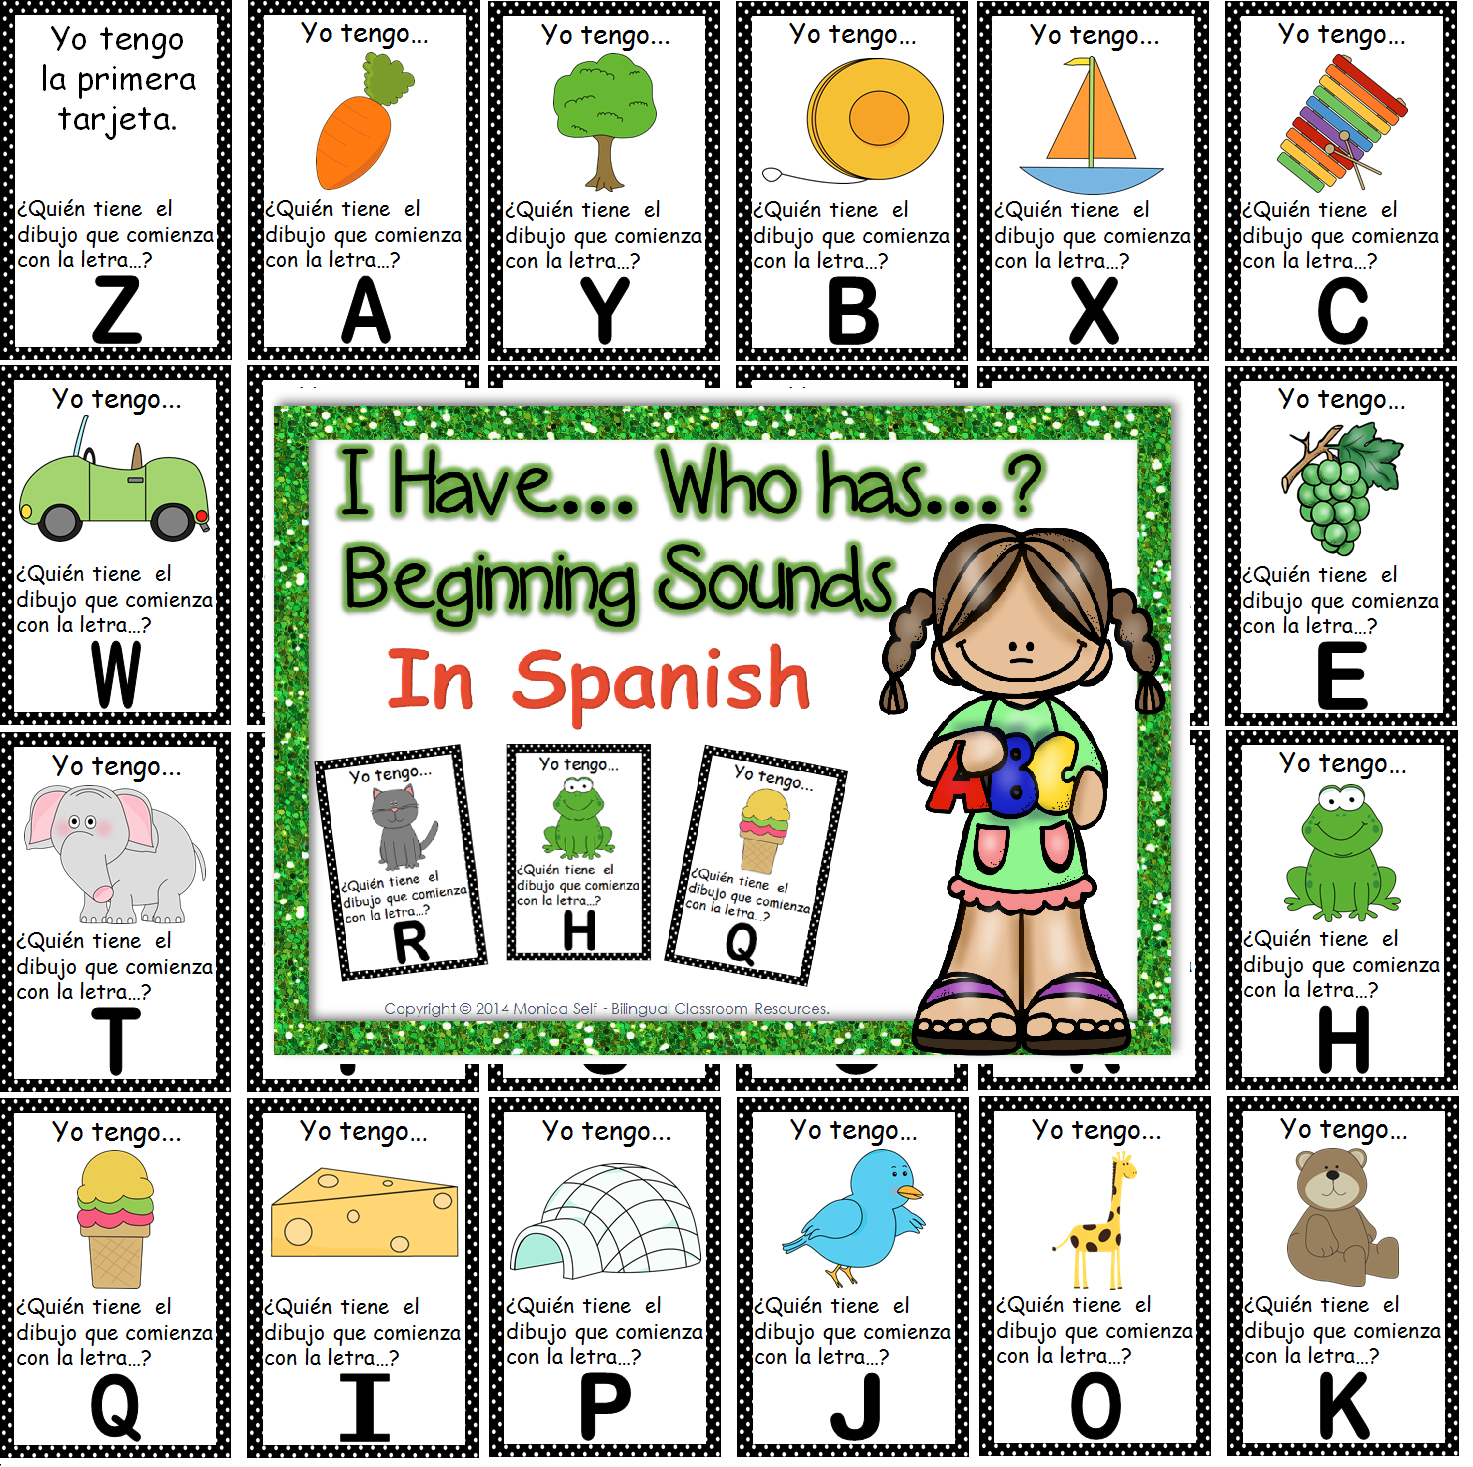 http://www.teacherspayteachers.com/Product/I-Have-Who-Has-Beginning-Sounds-in-Spanish-1297204